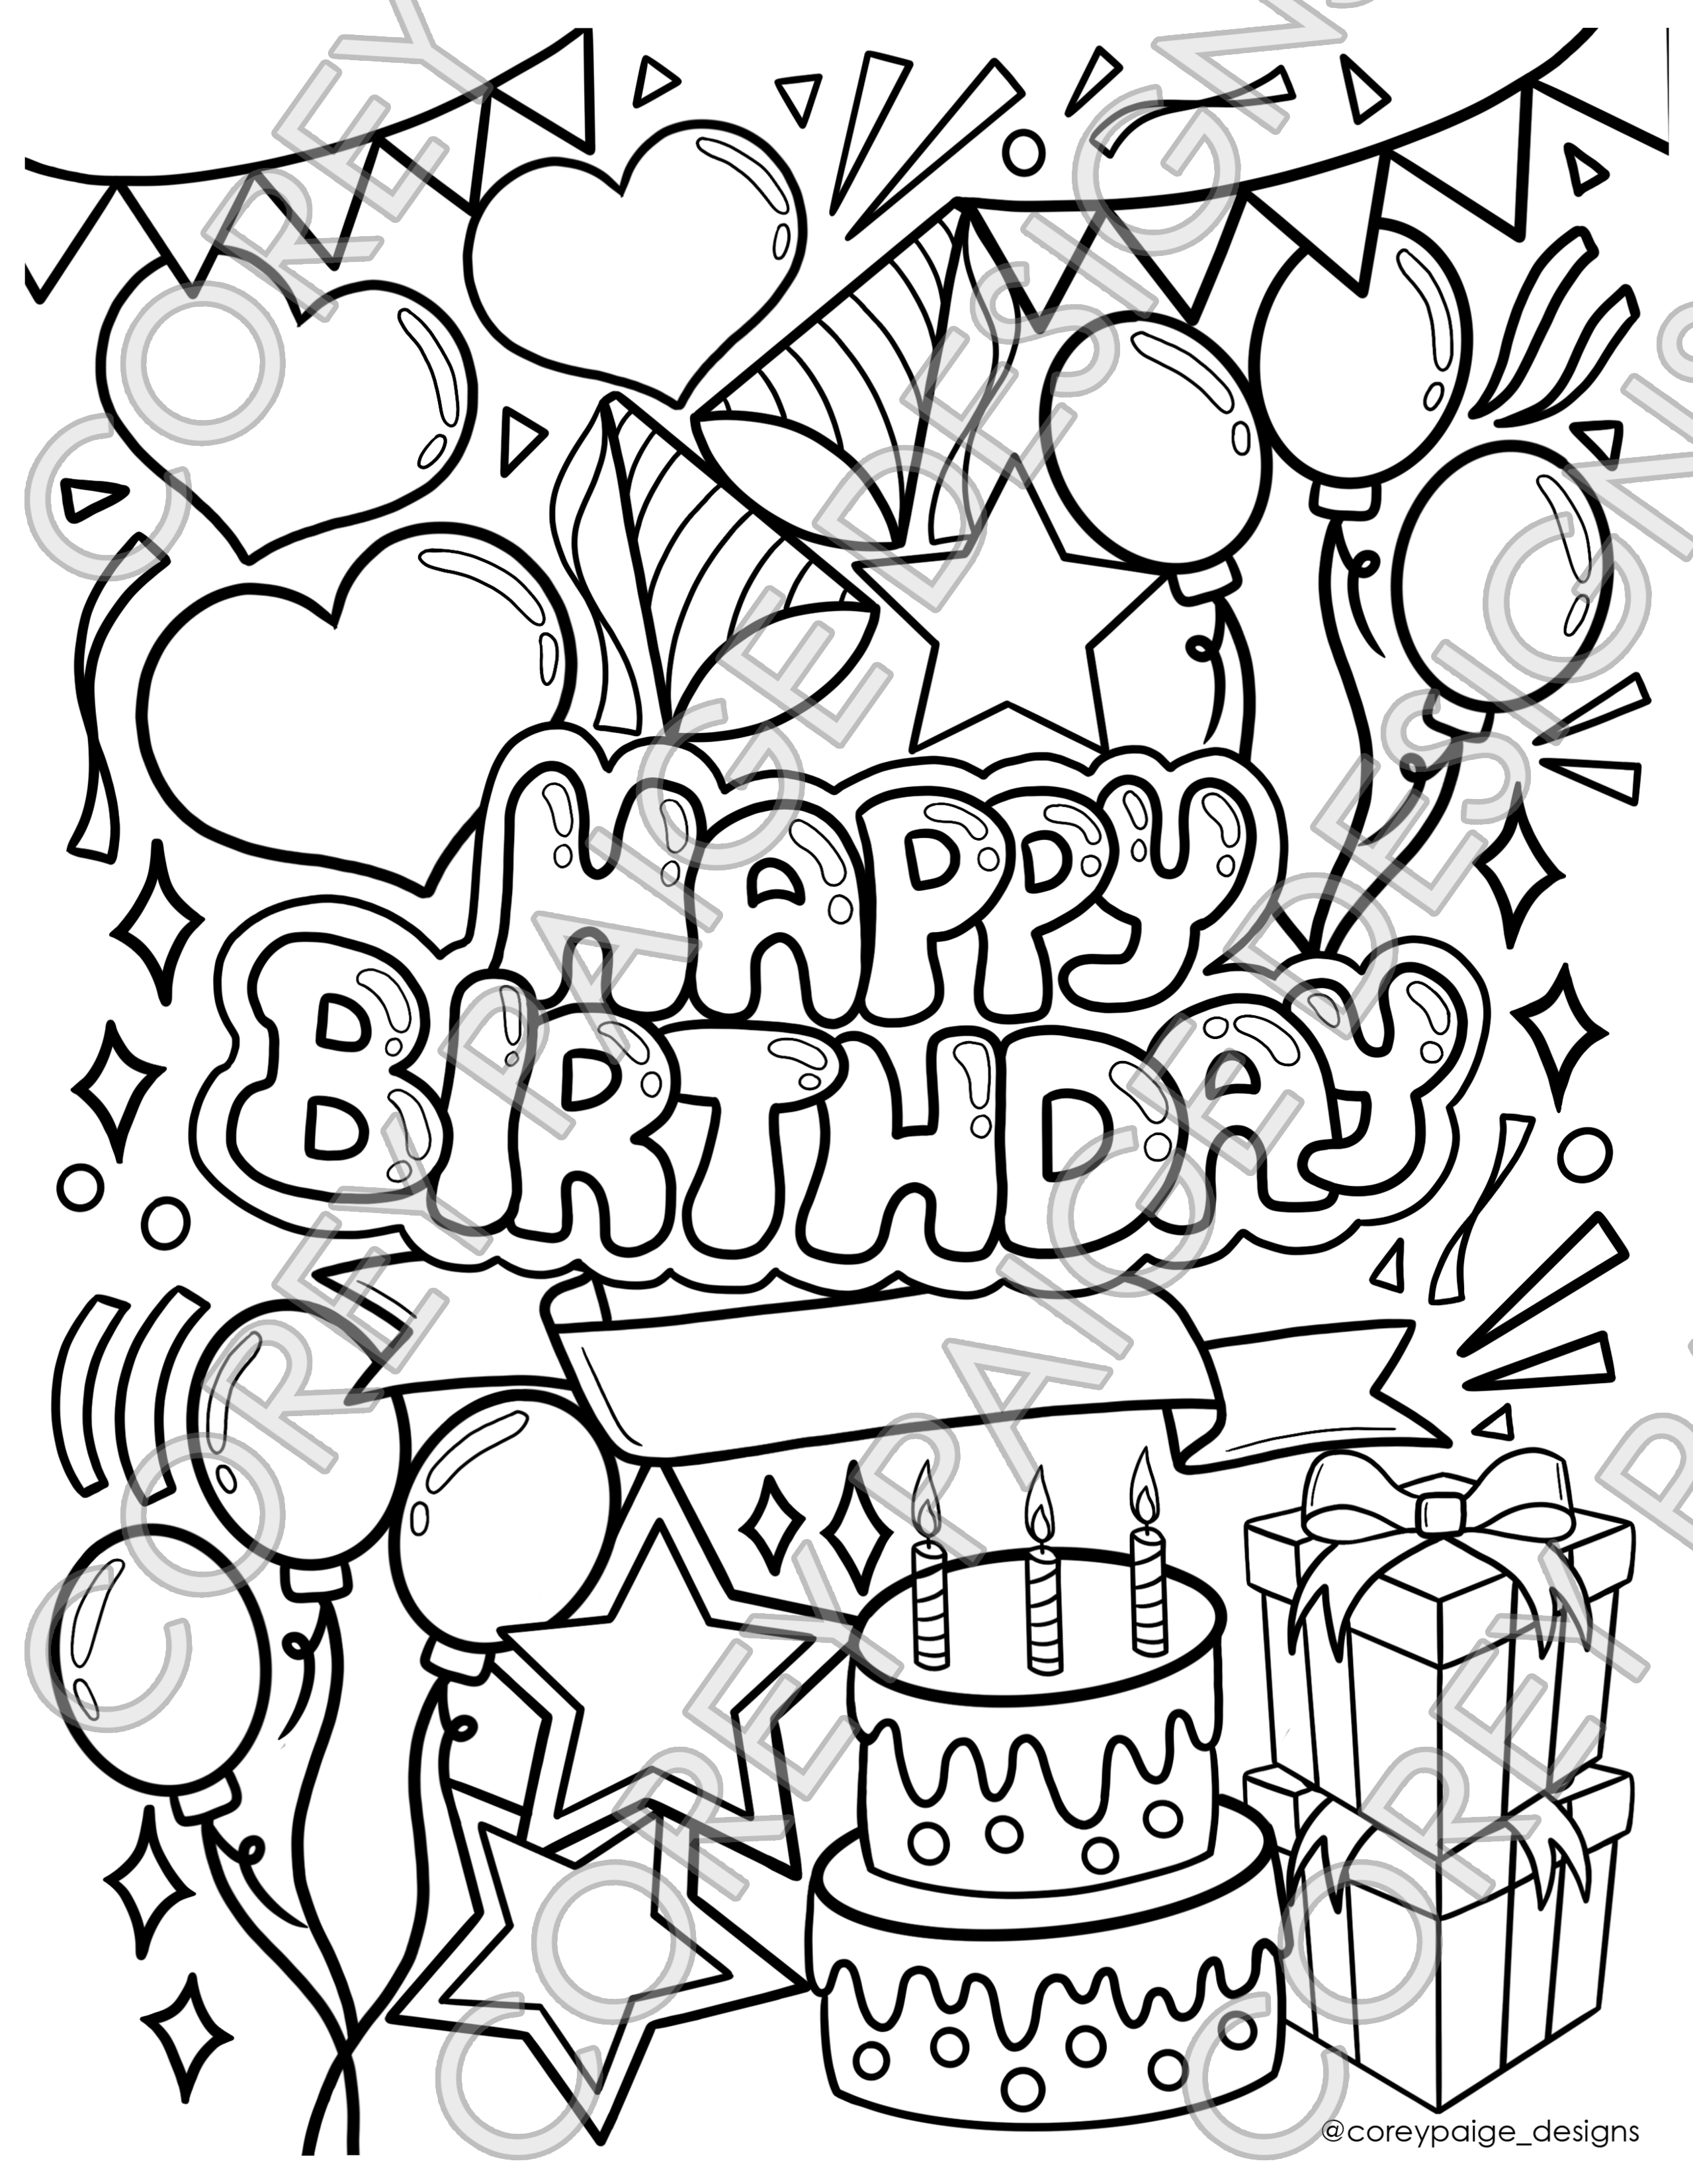 free-printable-happy-birthday-colouring-pages-printable-templates